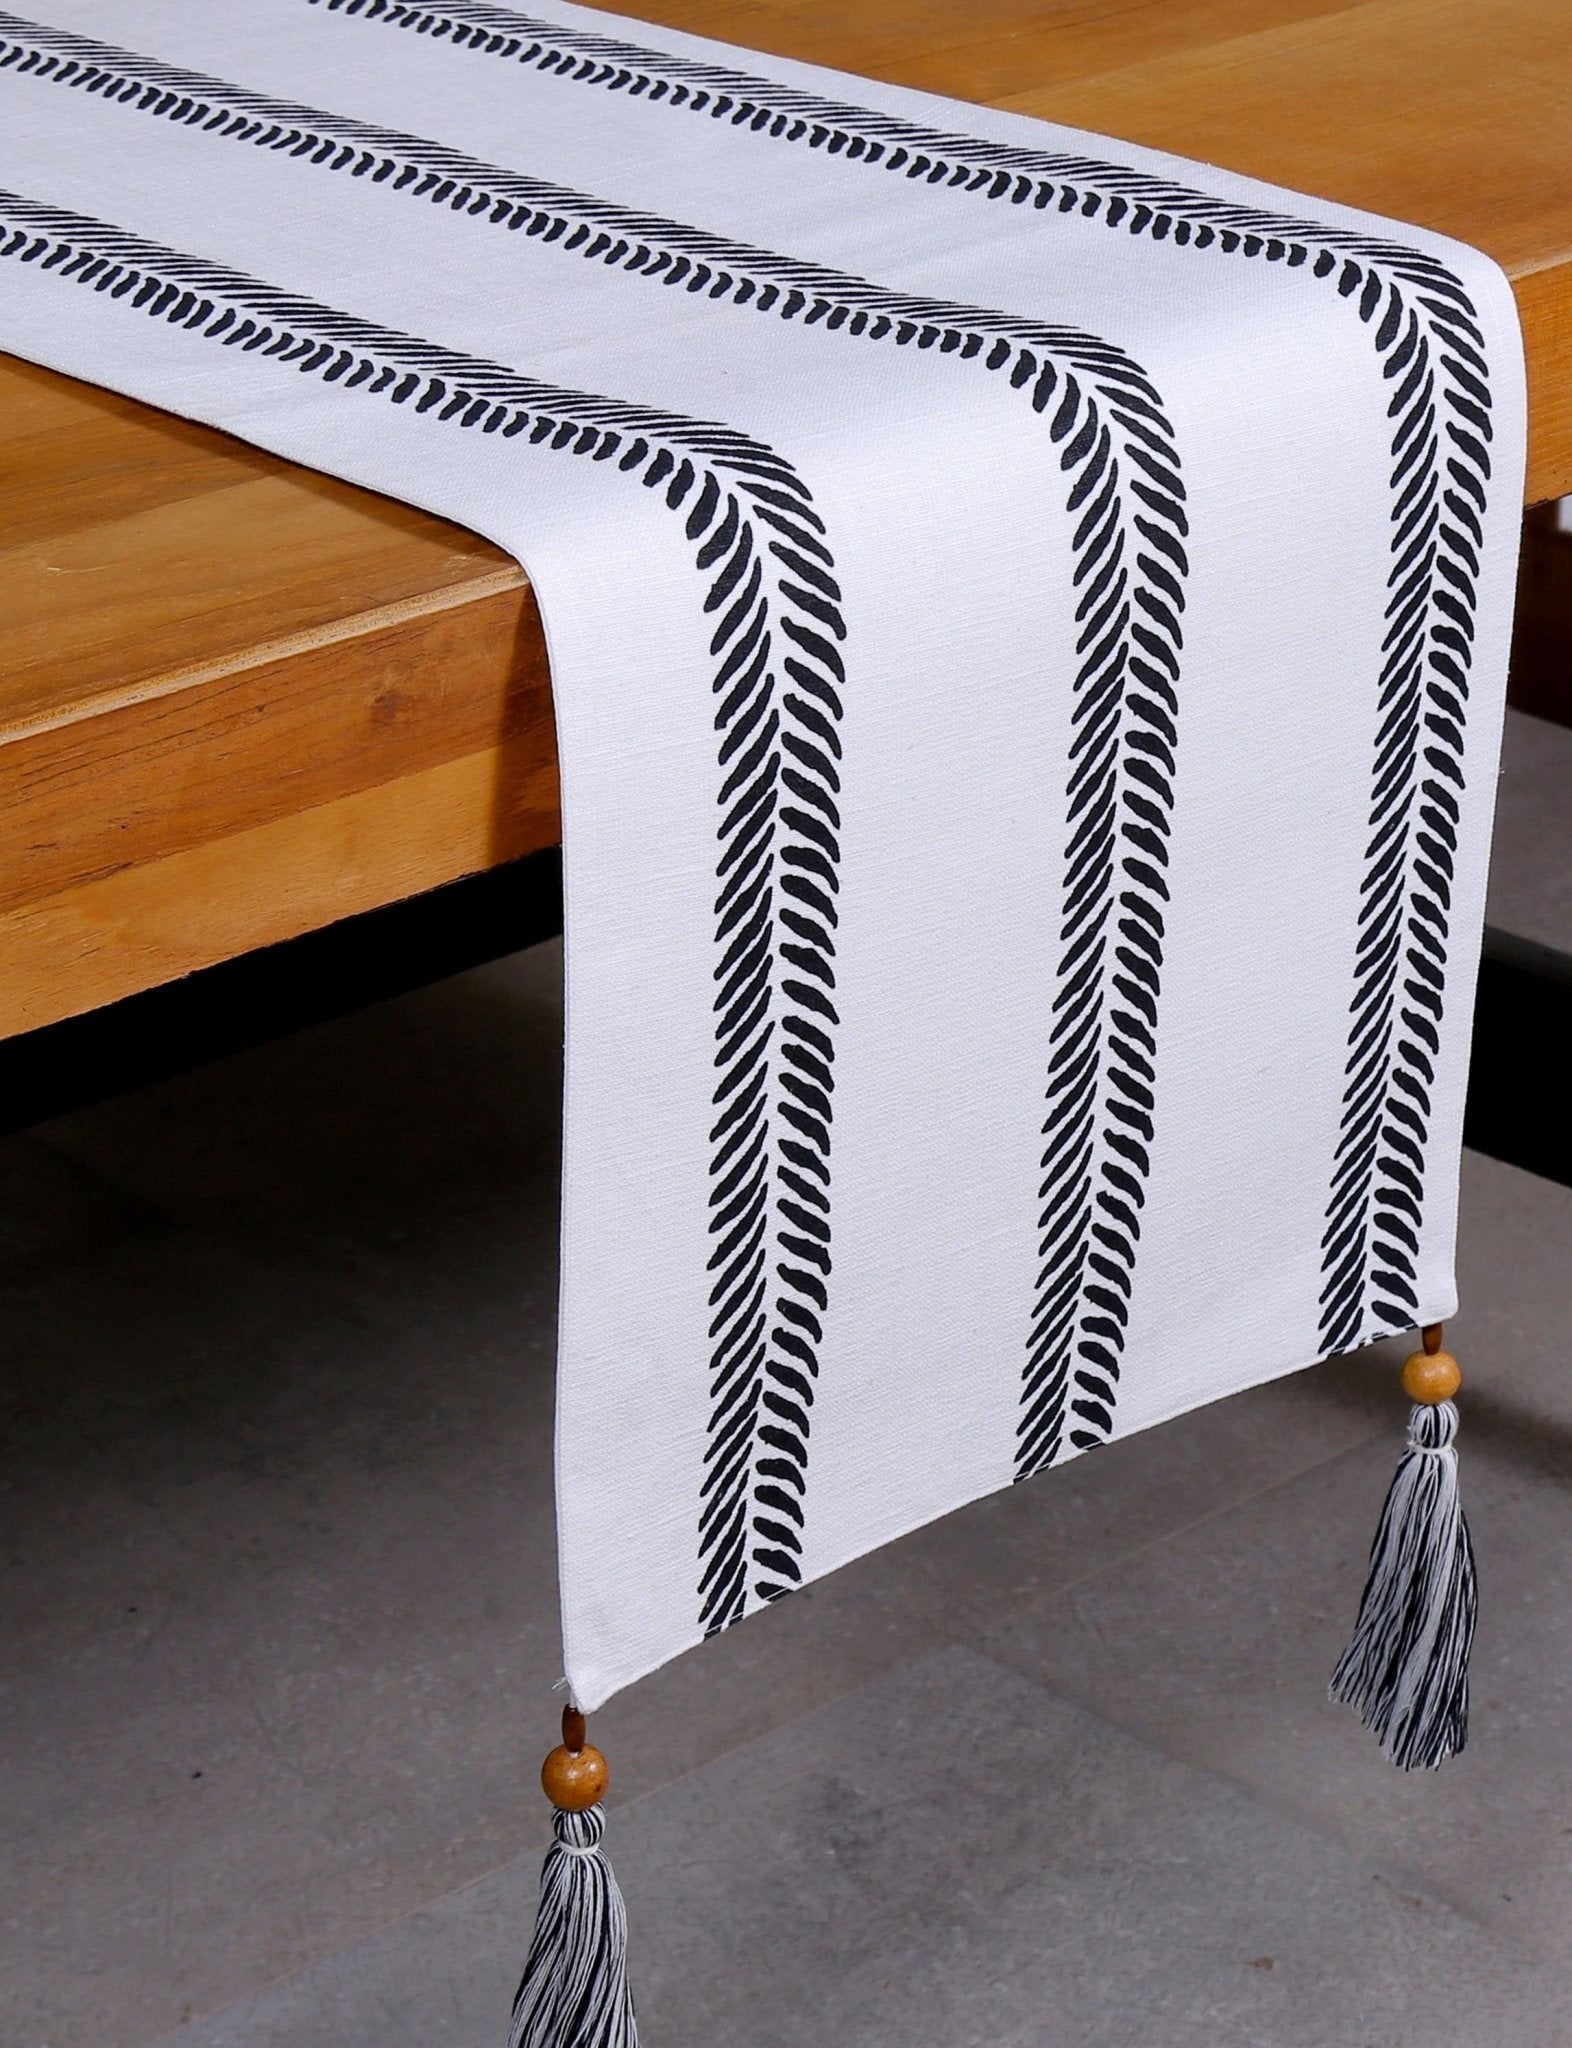 Printed 80" Woven Cotton Table Runner - Fenwick & OliverPrinted 80" Woven Cotton Table RunnerRich Home LinensFenwick & Oliver5278